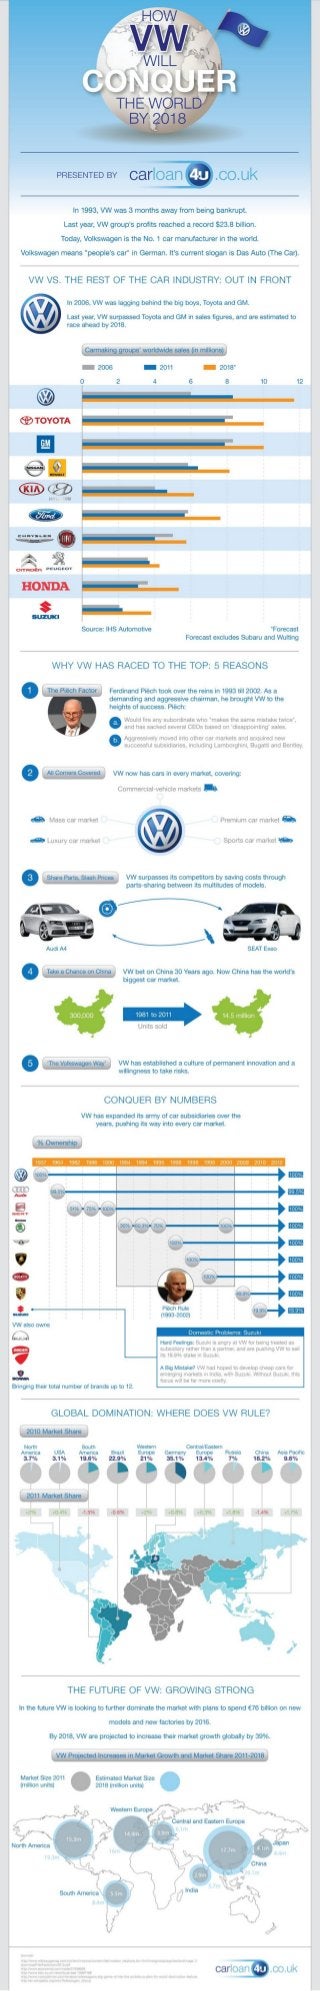 How Volkswagen will conquer the world by 2018